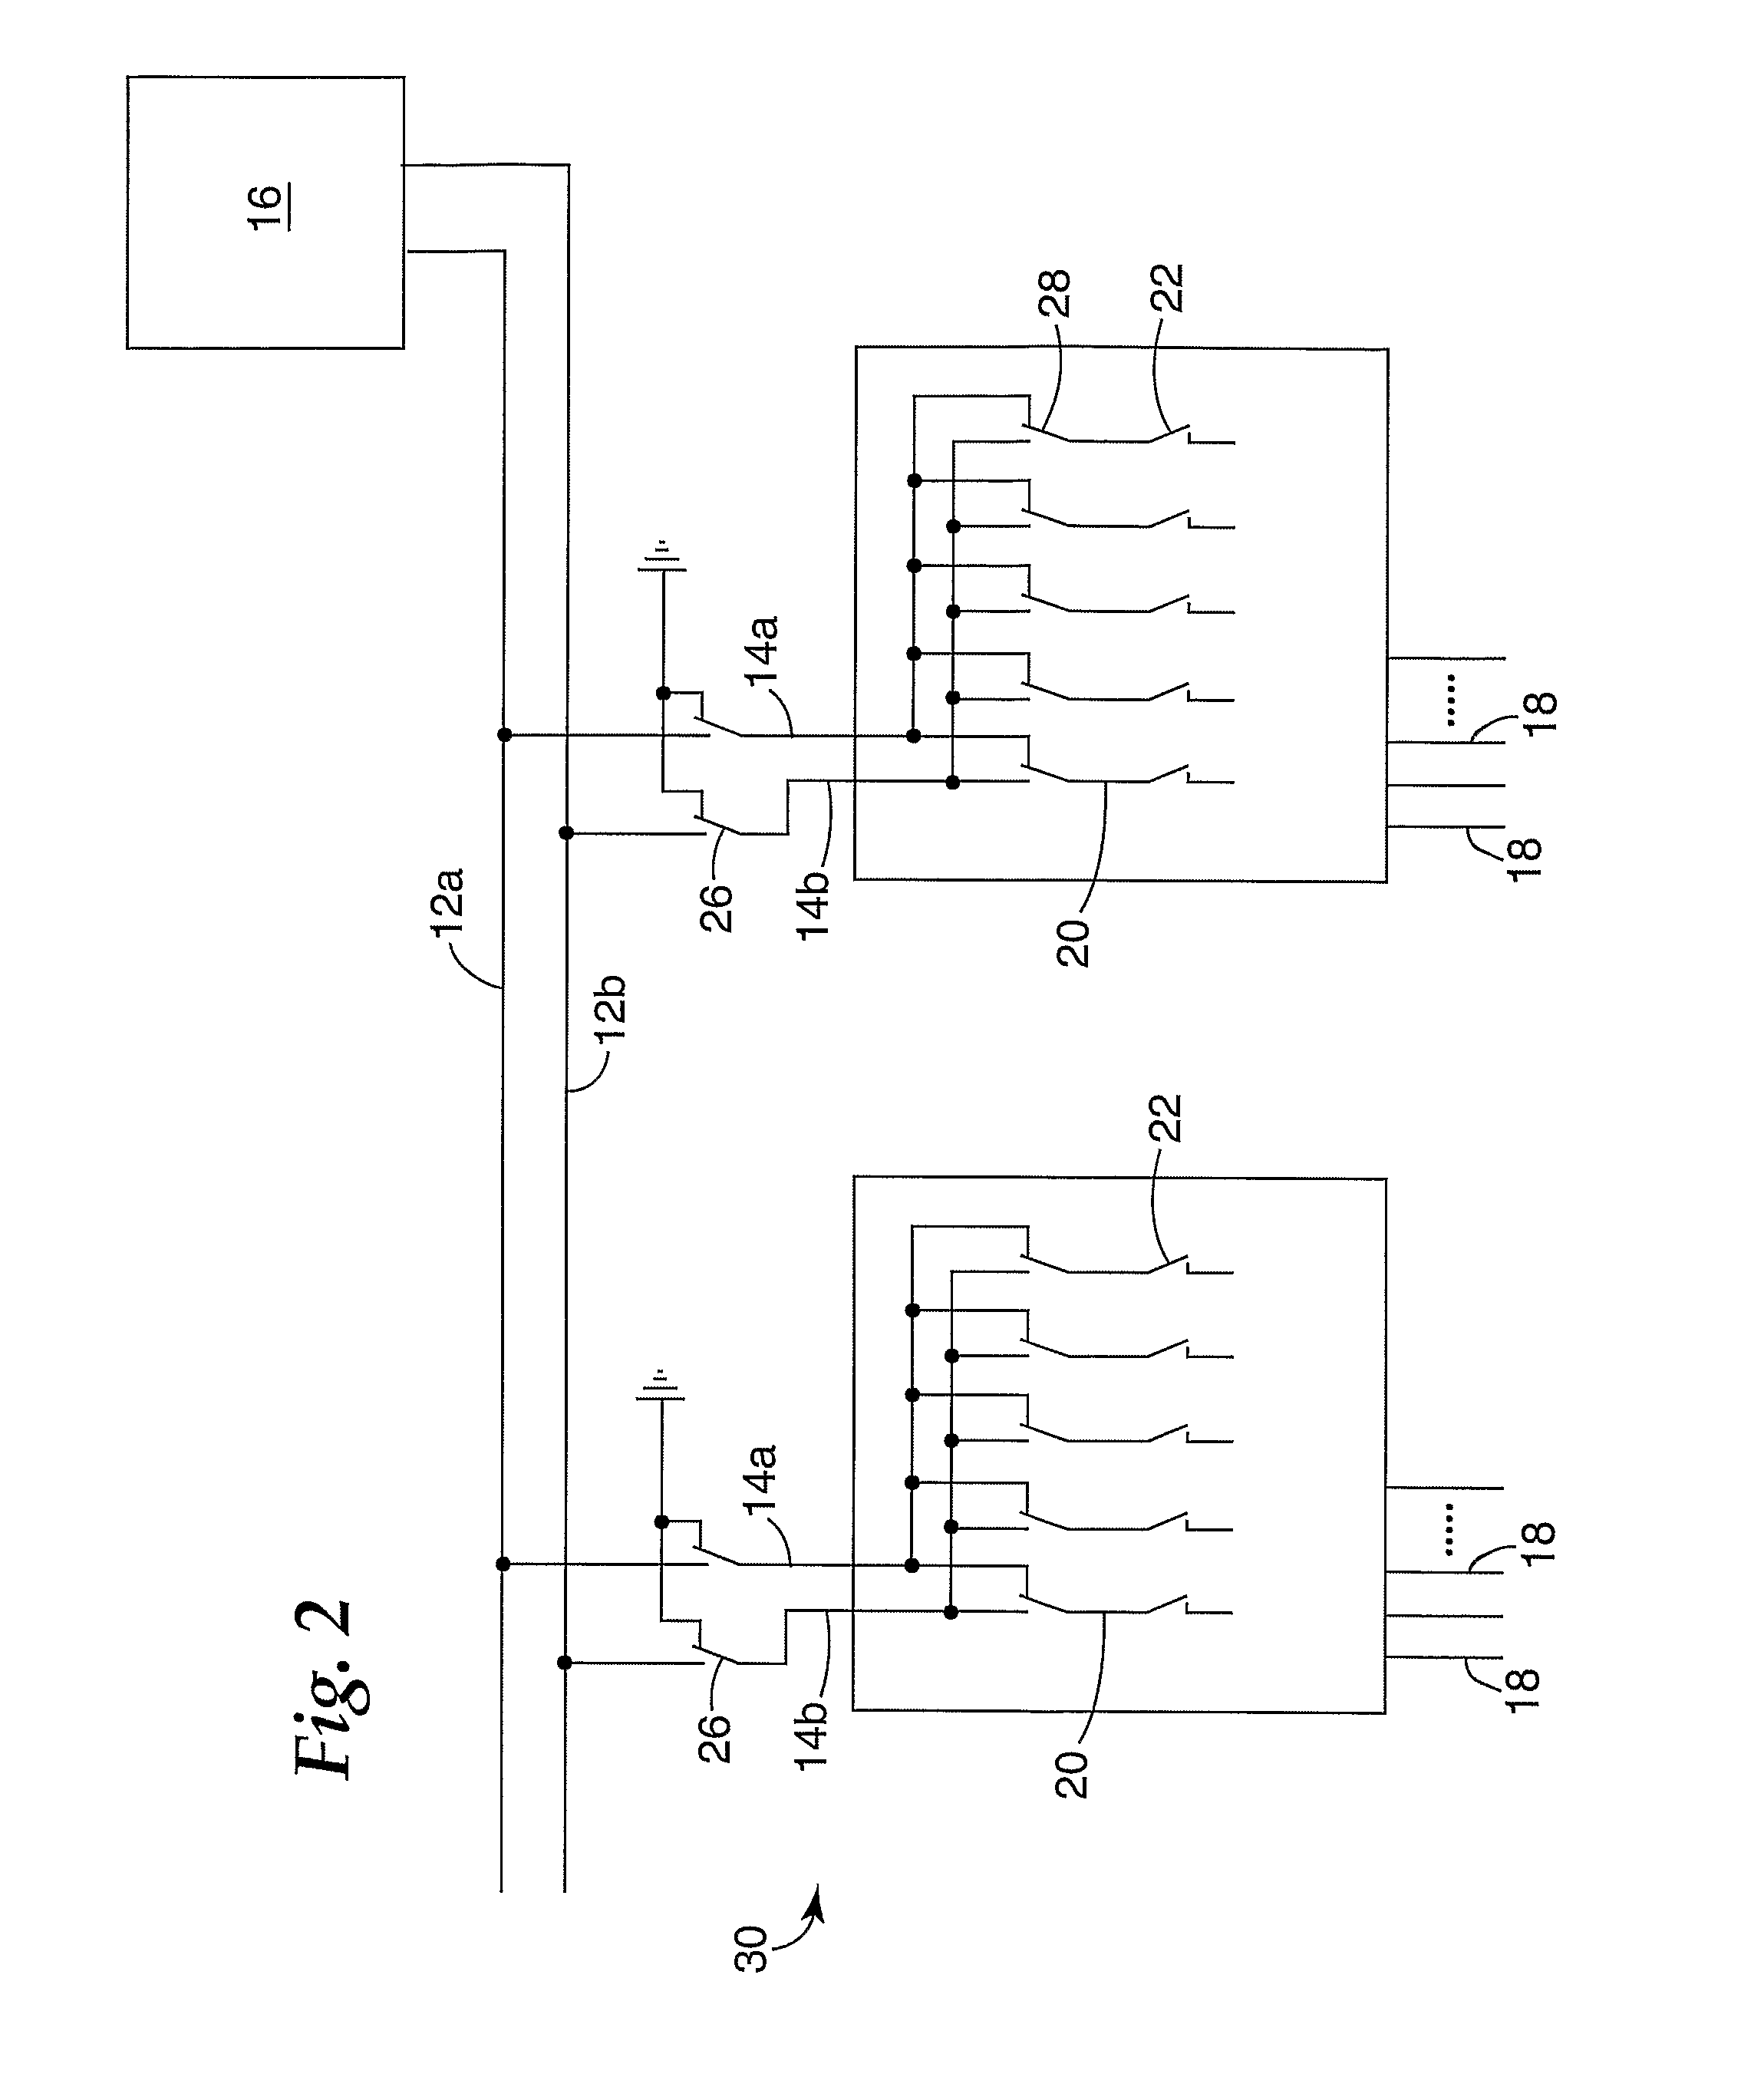 Circuit and Method for Providing Access to a Test and/or Monitoring System